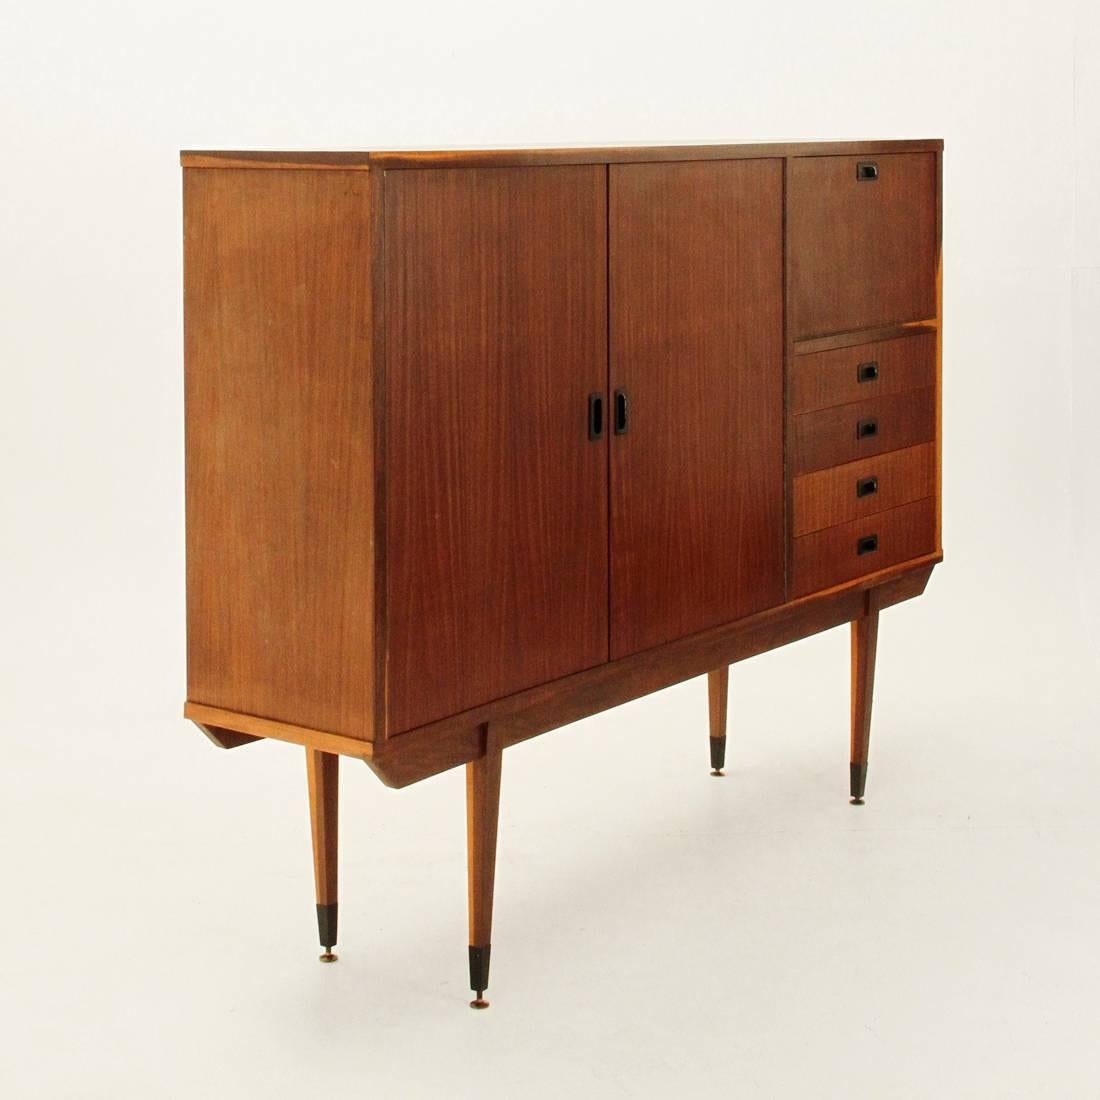 Handmade credenza from the 1950s
Veneered wood structure
One large compartment enclosed by doors
A curved rib and a set of four drawers
Adjustable brass feet
Black lacquered iron handles
Good general conditions.